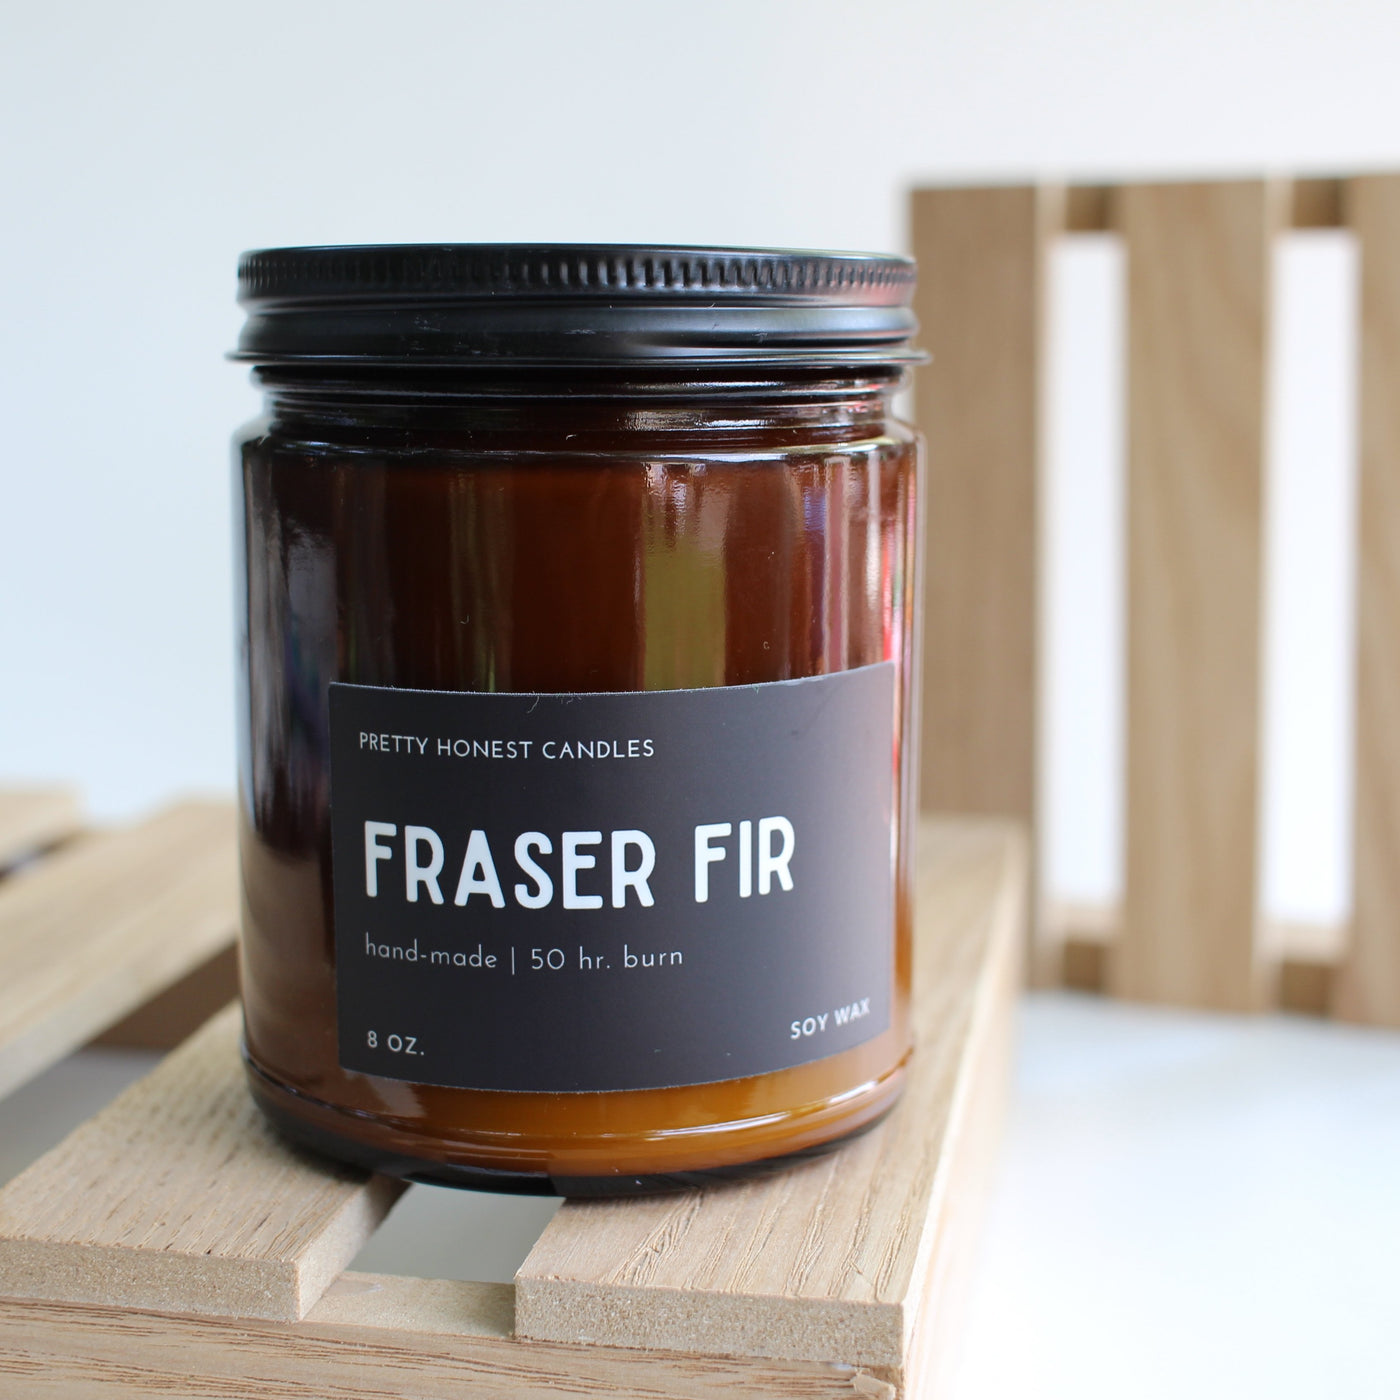 Fraser Fir Soy Candle - Amber Collection - Pretty Honest Candles